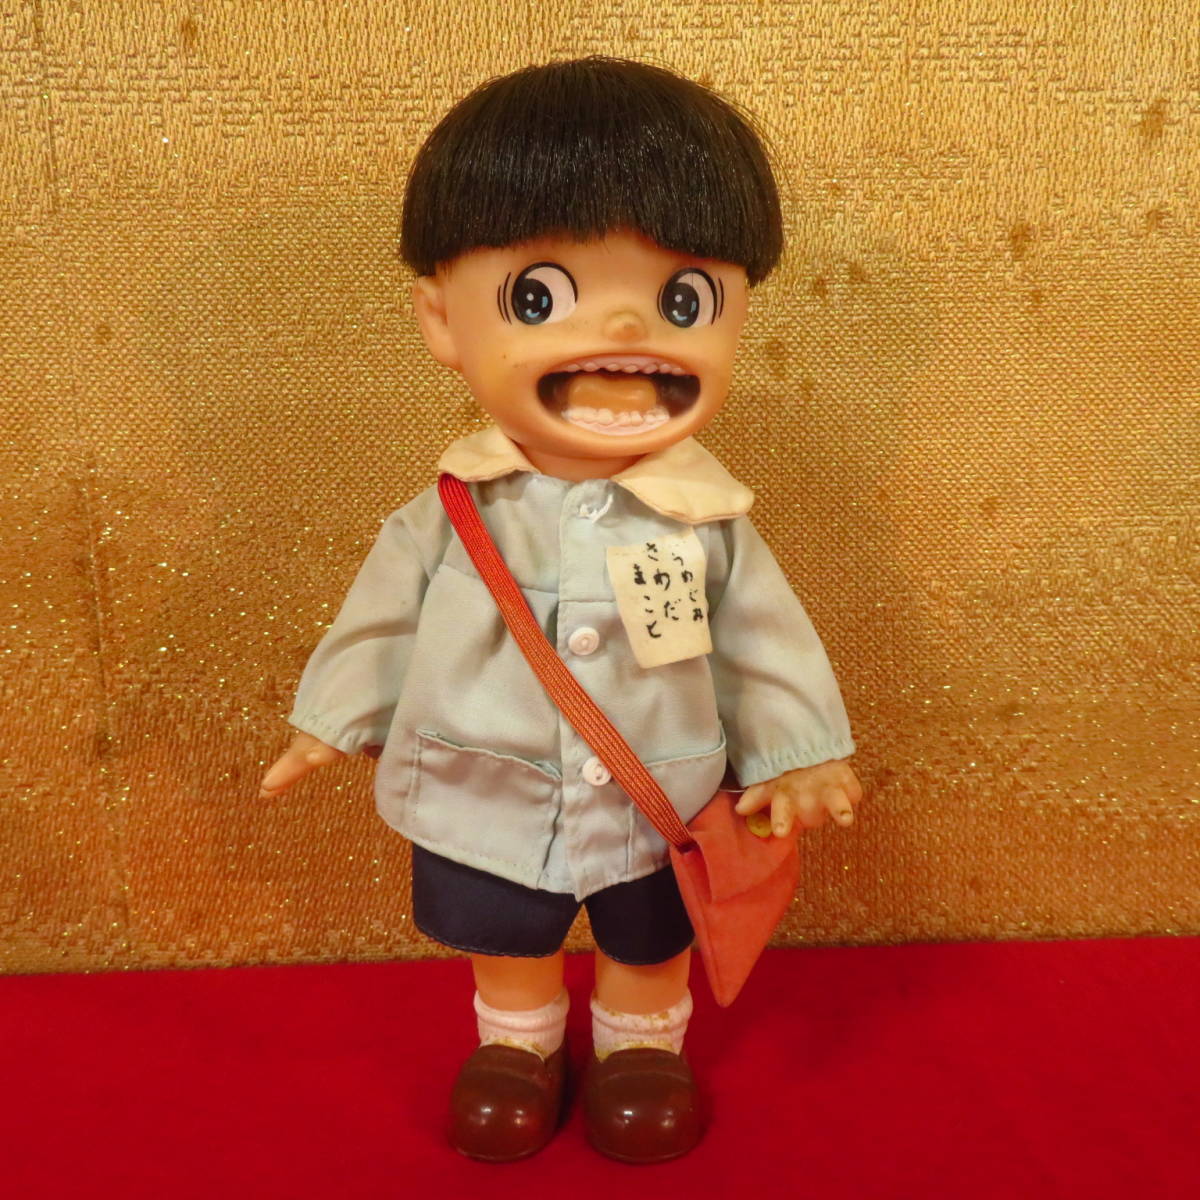  rare rare article that time thing [ANSONY Anthony ... Chan sofvi doll ]..... rare thing treasure . map number . Showa Retro figure height 22cm